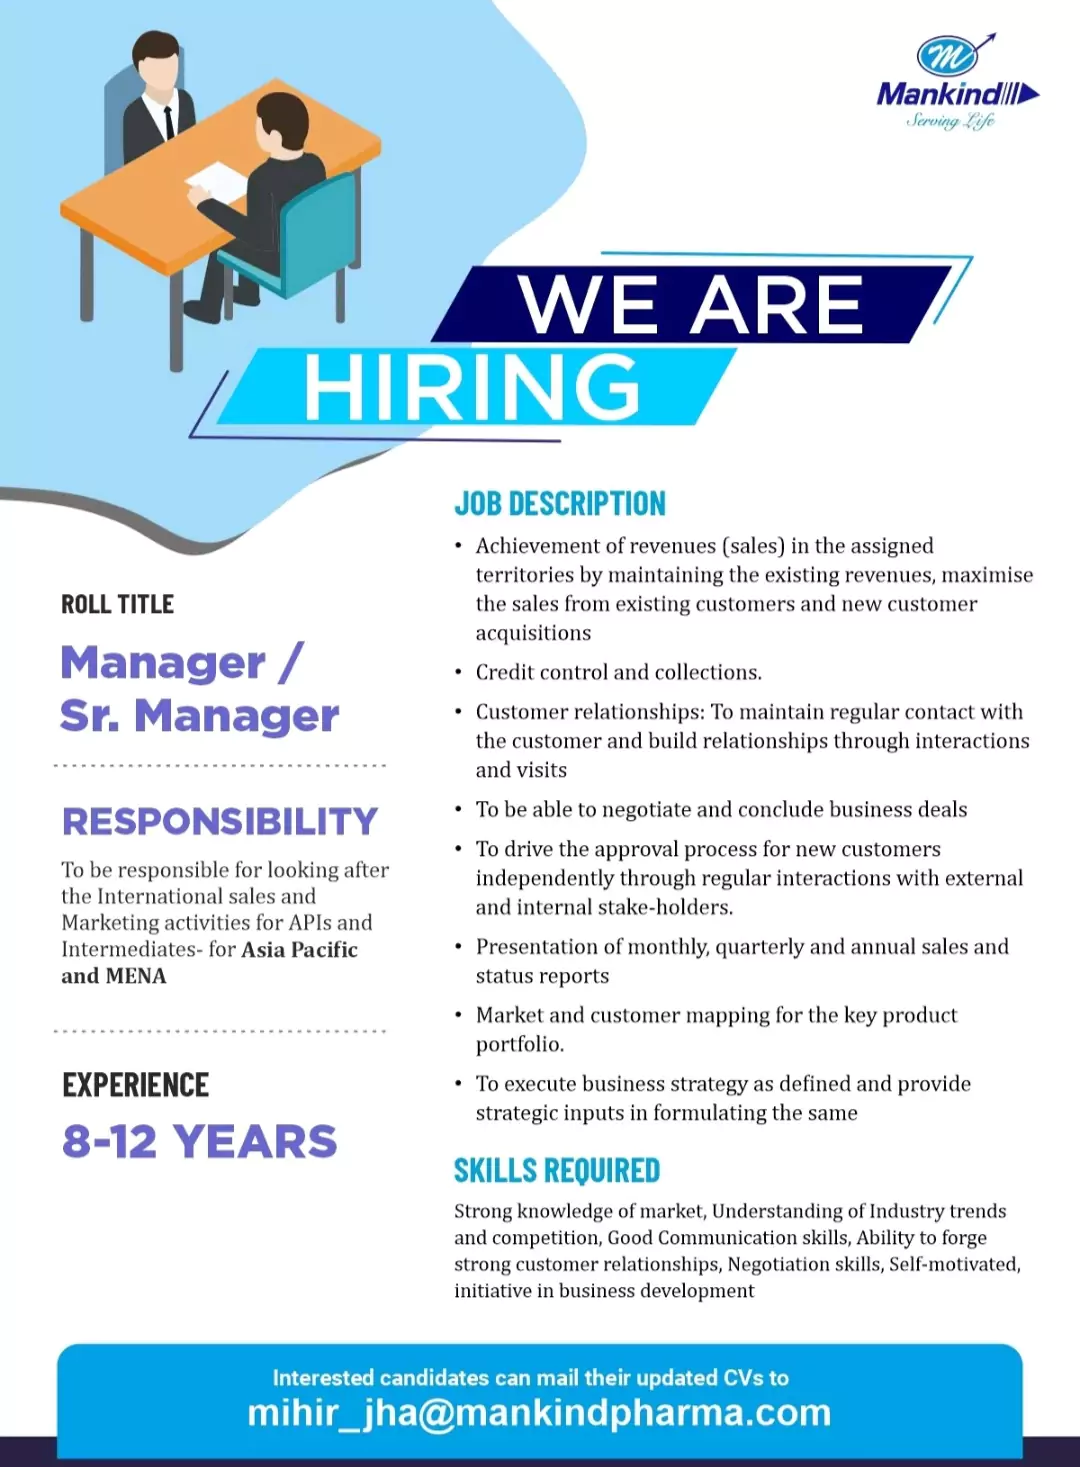 Mankind Hiring for Manager, Sr. Manager positions